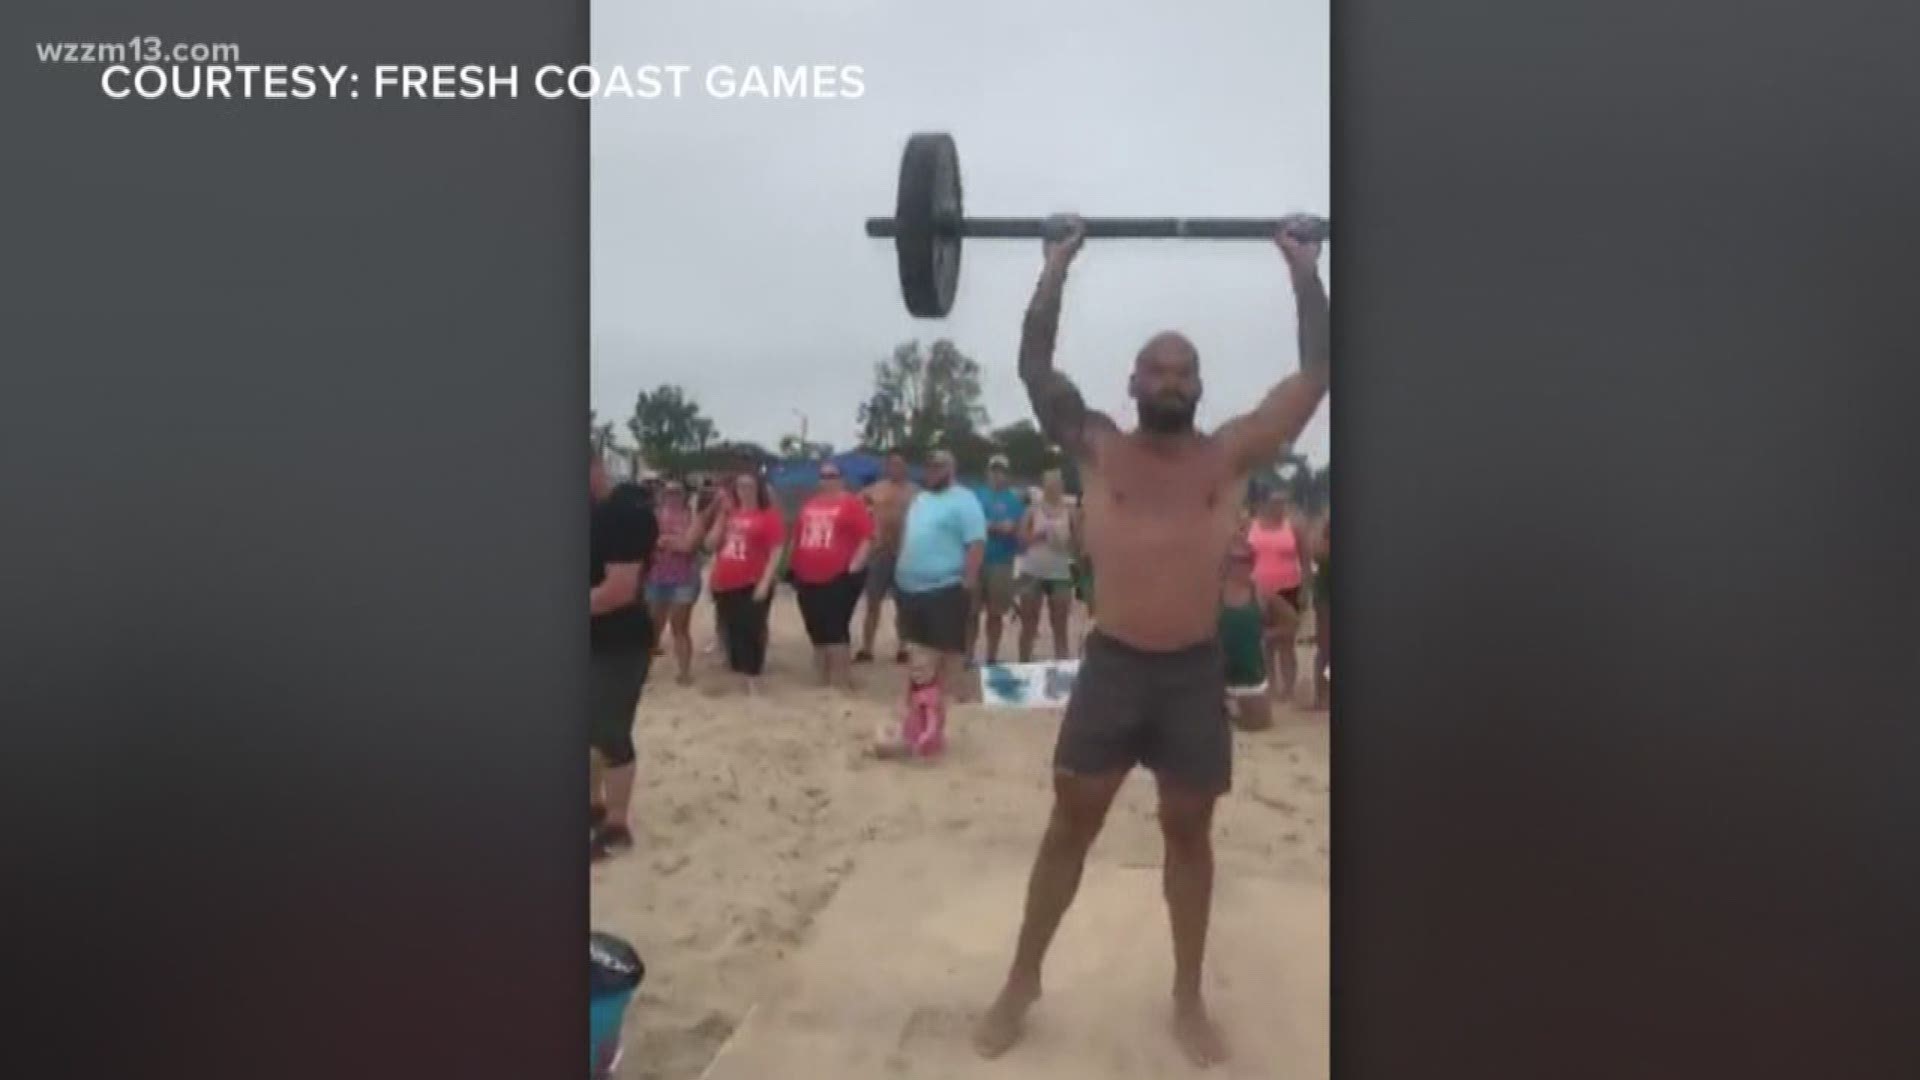 Fresh Coast games take place in Muskegon